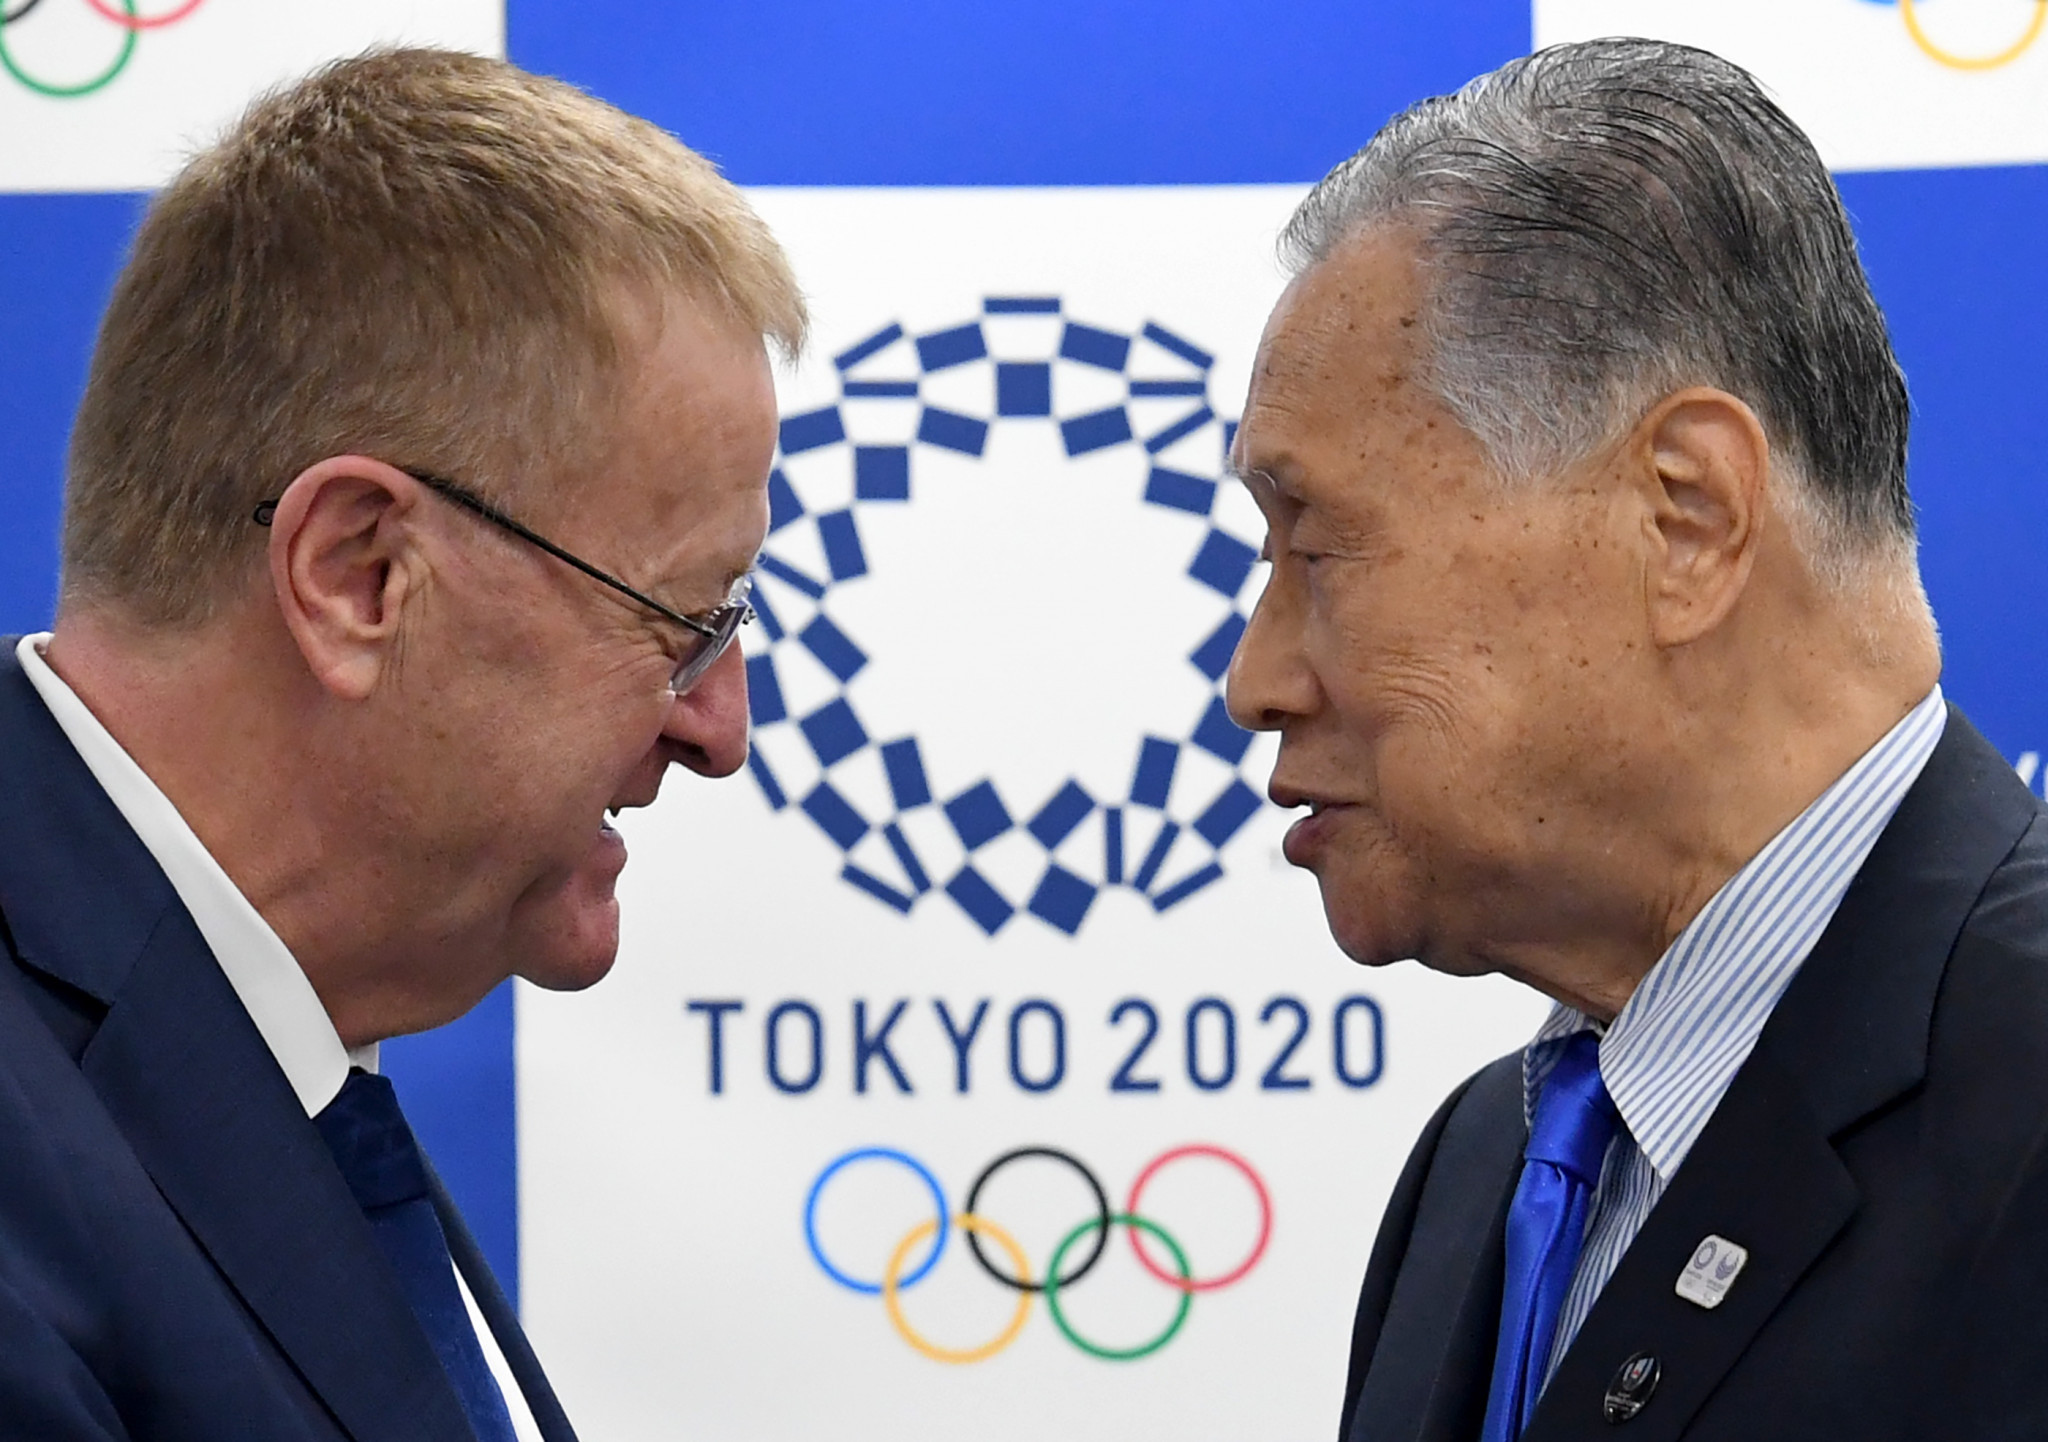 Tokyo 2020 President keen to learn from Pyeongchang 2018 when observing Winter Olympics